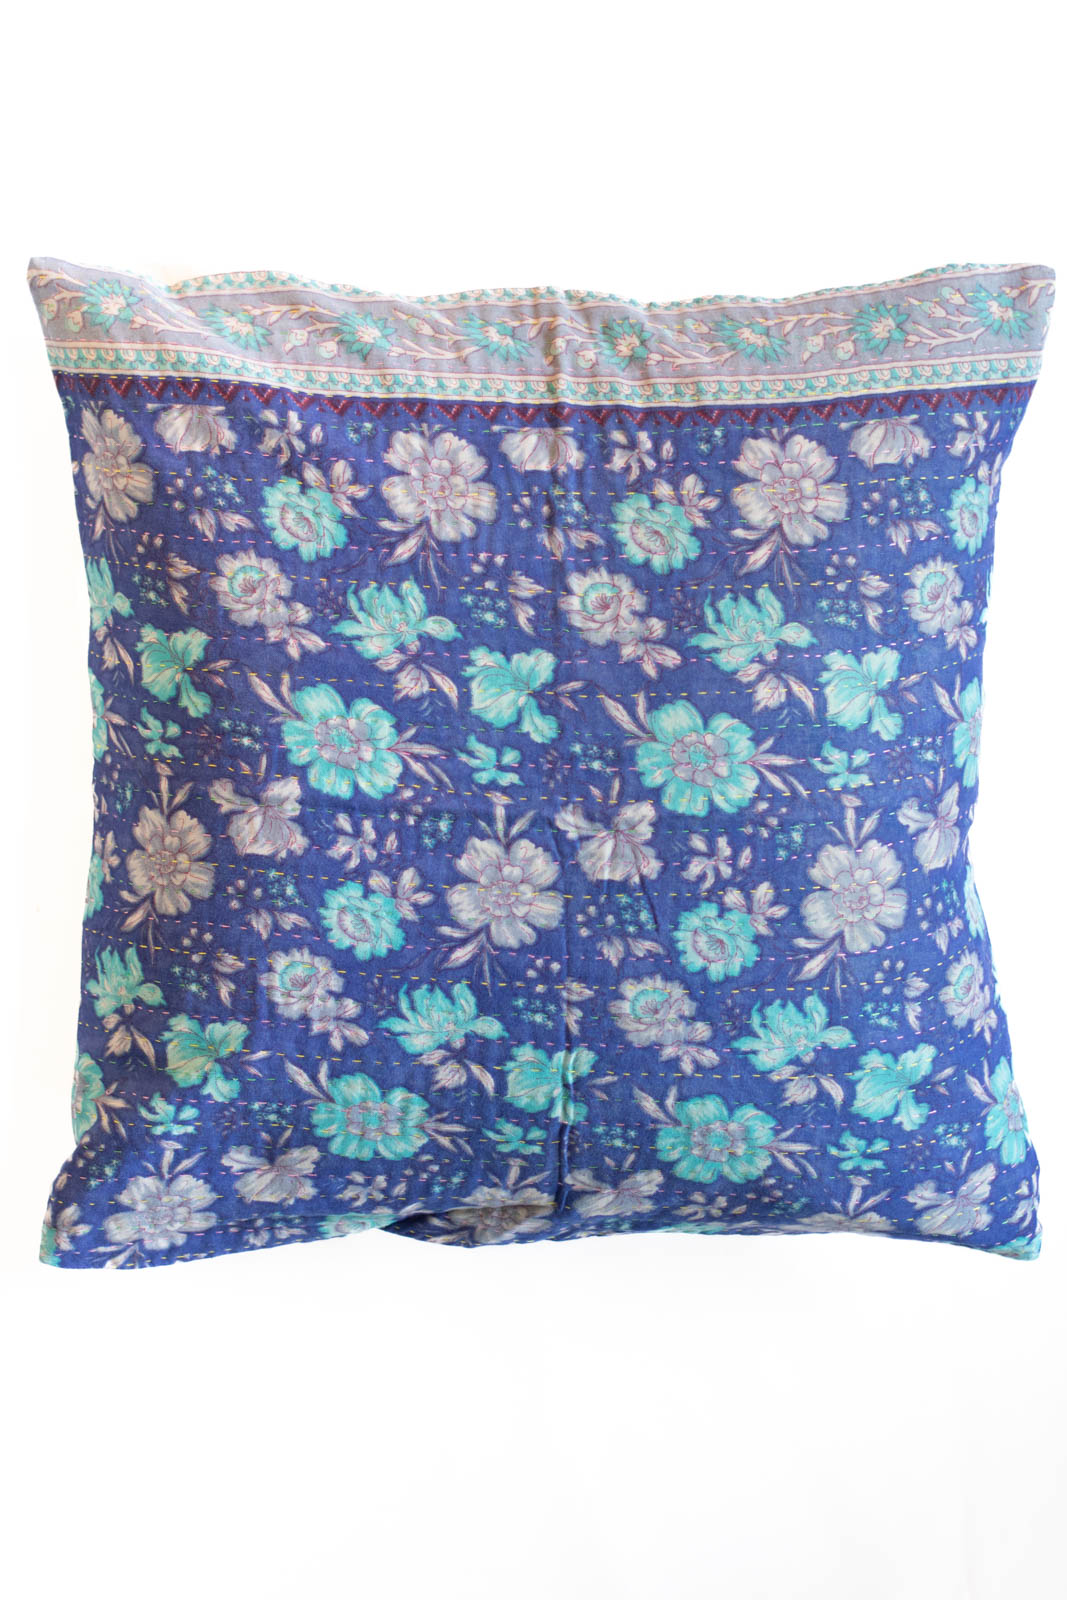 Dignity no. 4 Kantha Pillow Cover